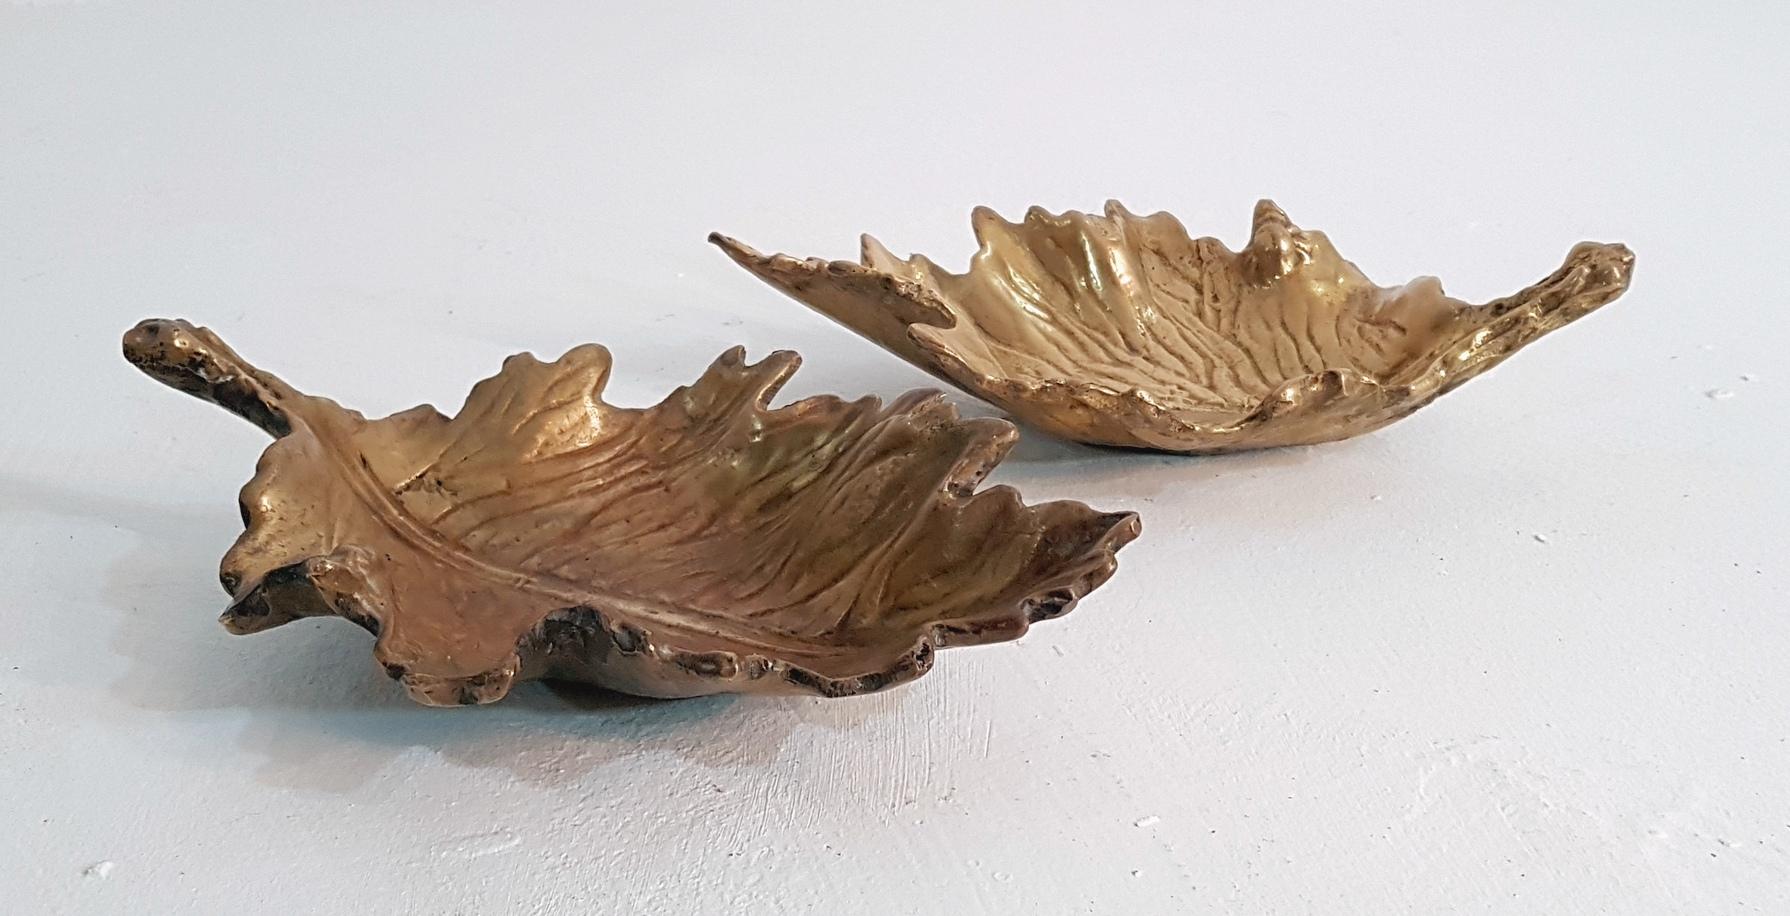 A pair of identical cast bronze tray for keys, nick-nacks or as ashtray, or simply because it’s beautiful. Note the little lady bug on the edge of the leaf. With a slight difference in tone they play off each other like natural leaves almost.